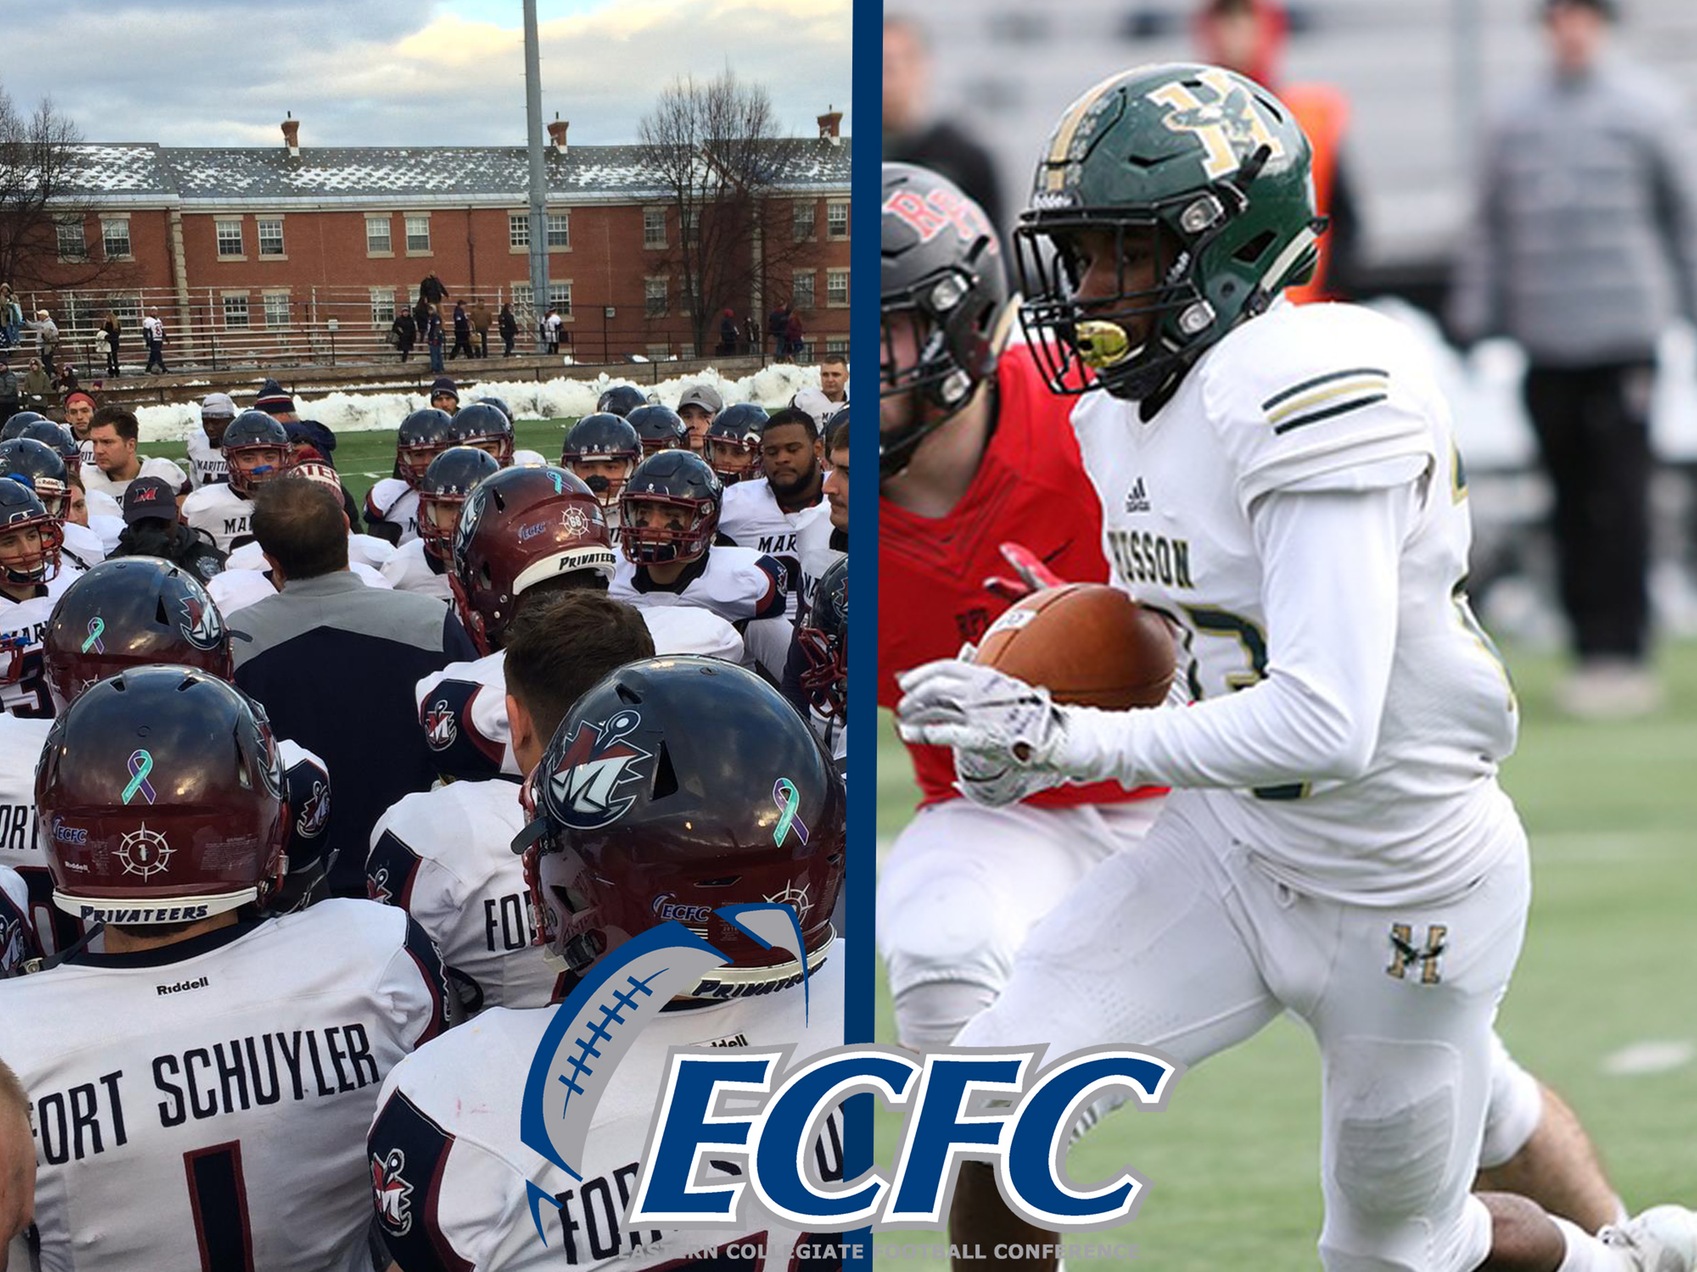 Husson & Maritime Fall in Postseason Contests